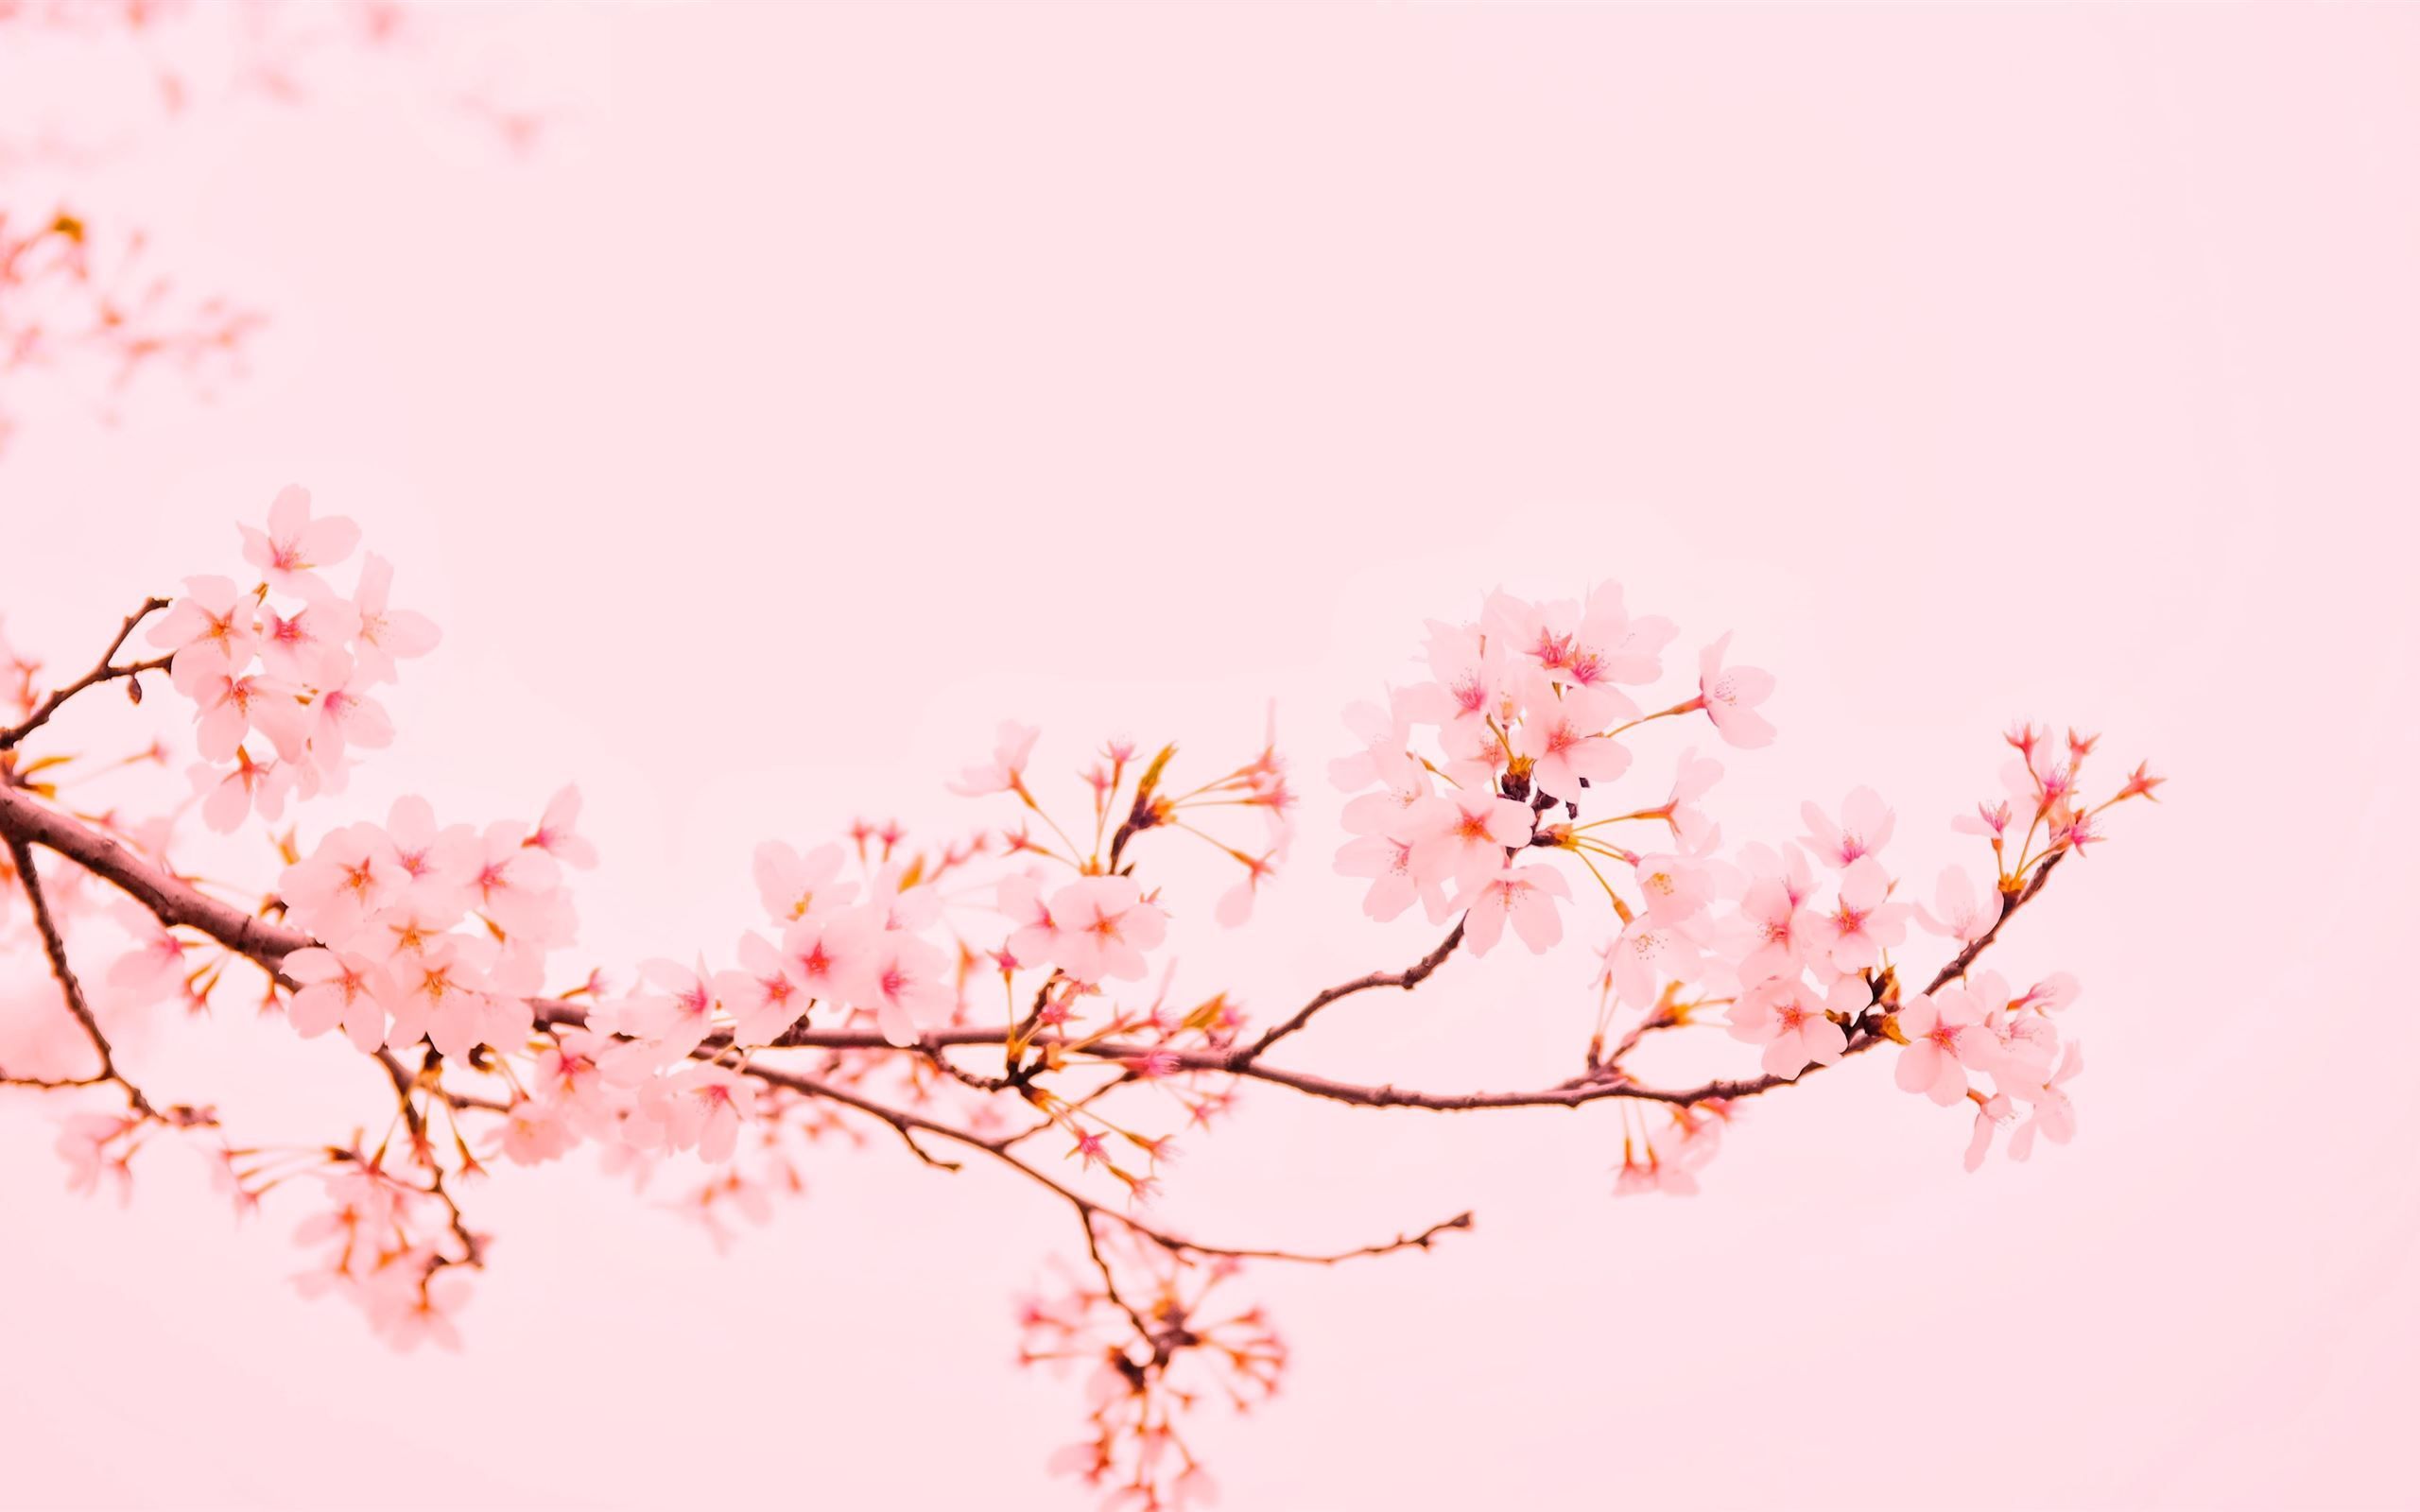 Pink flowers on a branch against a pink background - IMac